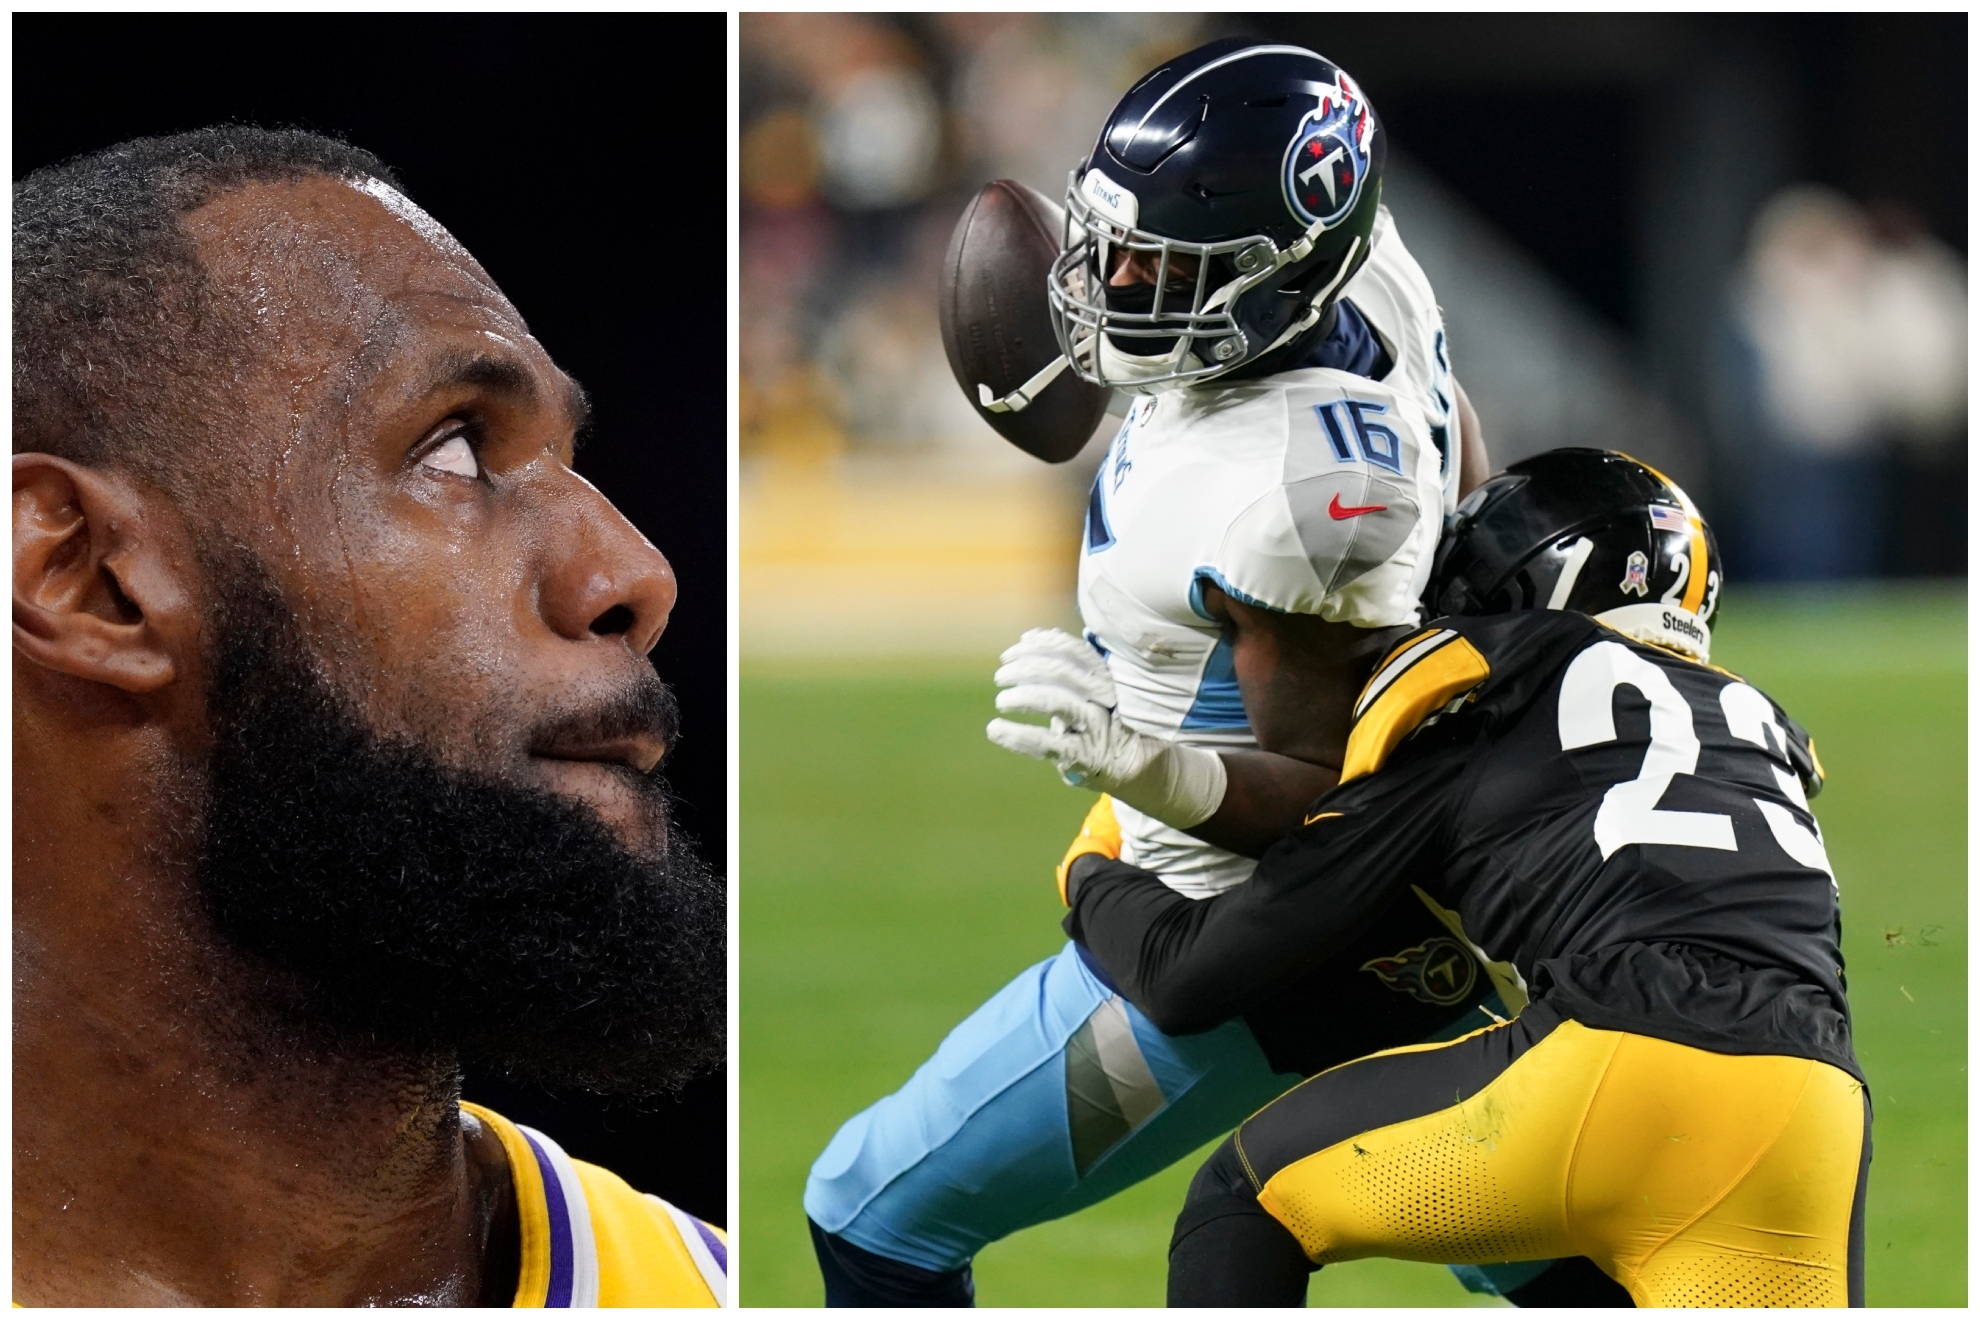 LeBron James and Titans vs Steelers